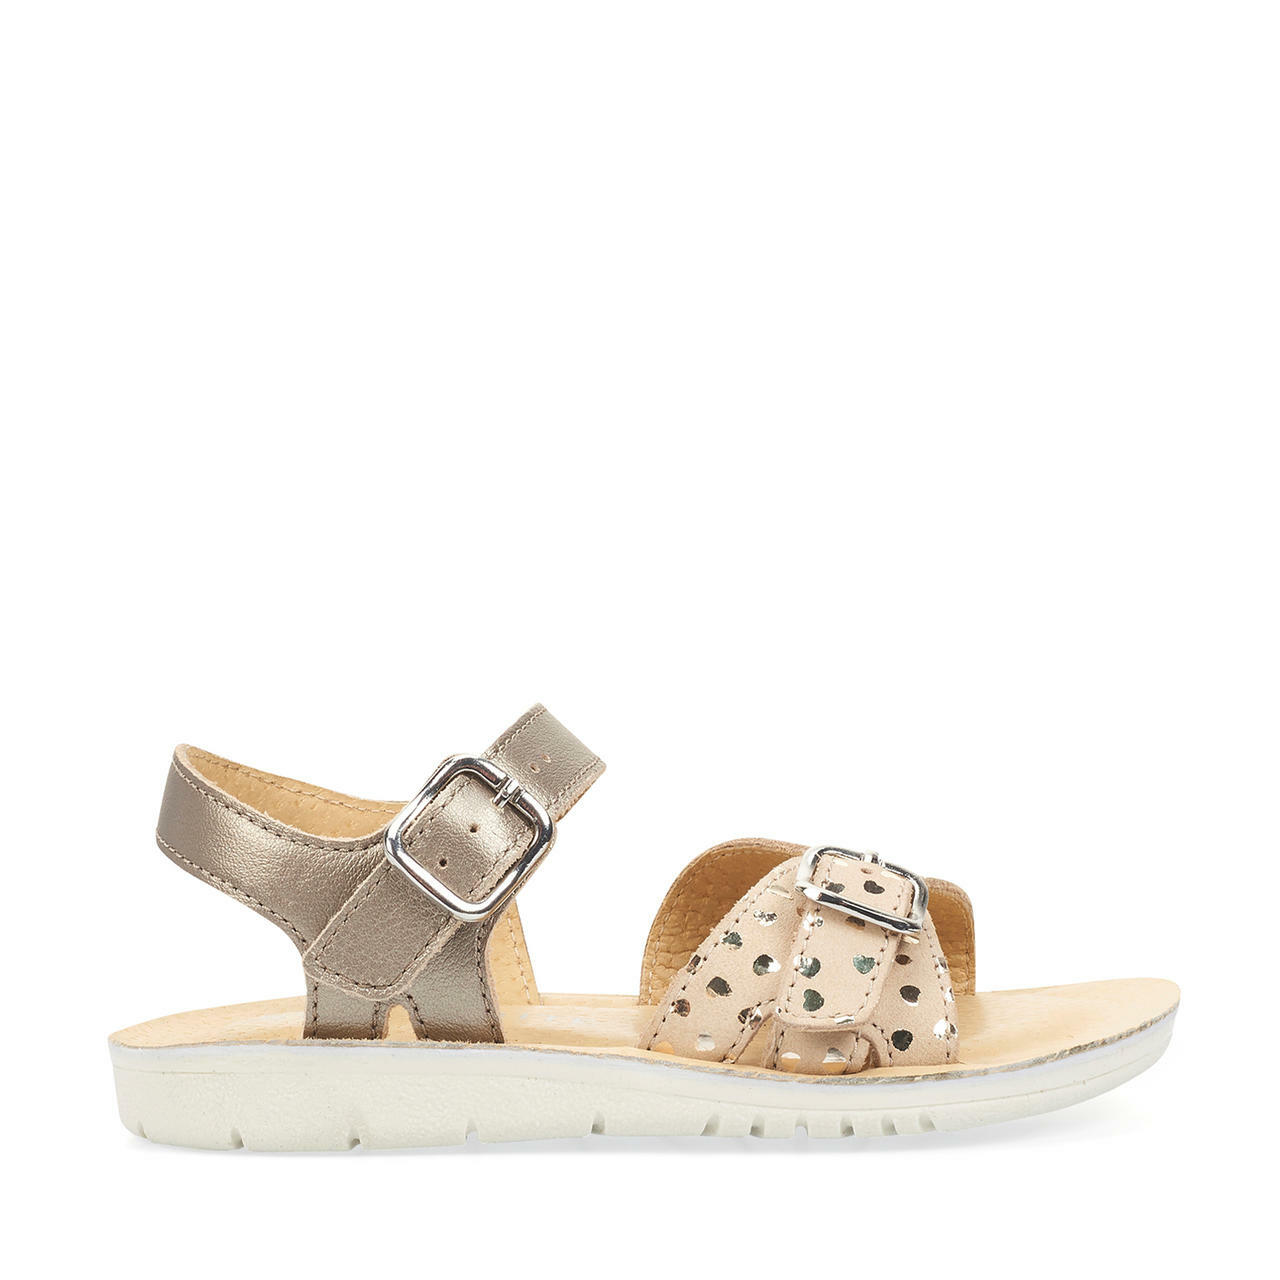 A girls sandal by Start Rite ,style Enchant, in gold leather with buckle fastening. Right side view.